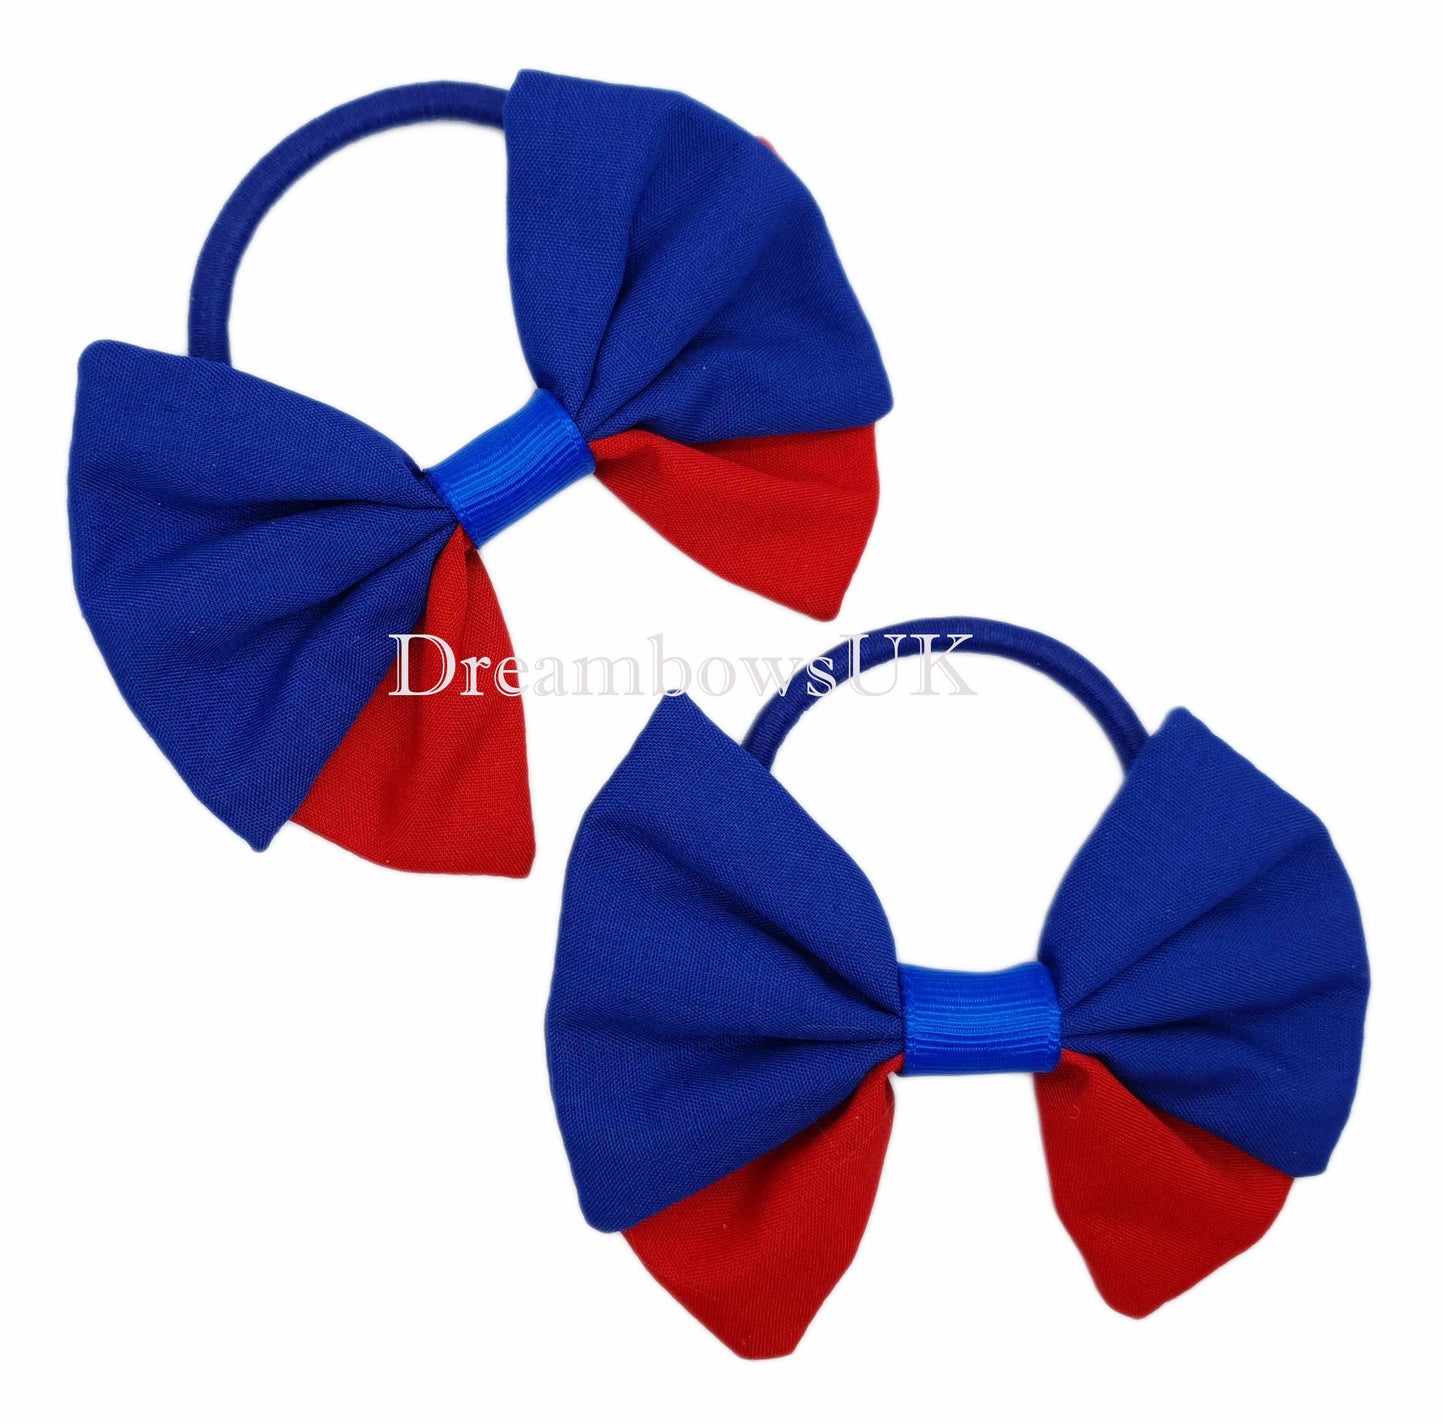 2x Royal blue and red fabric hair bows